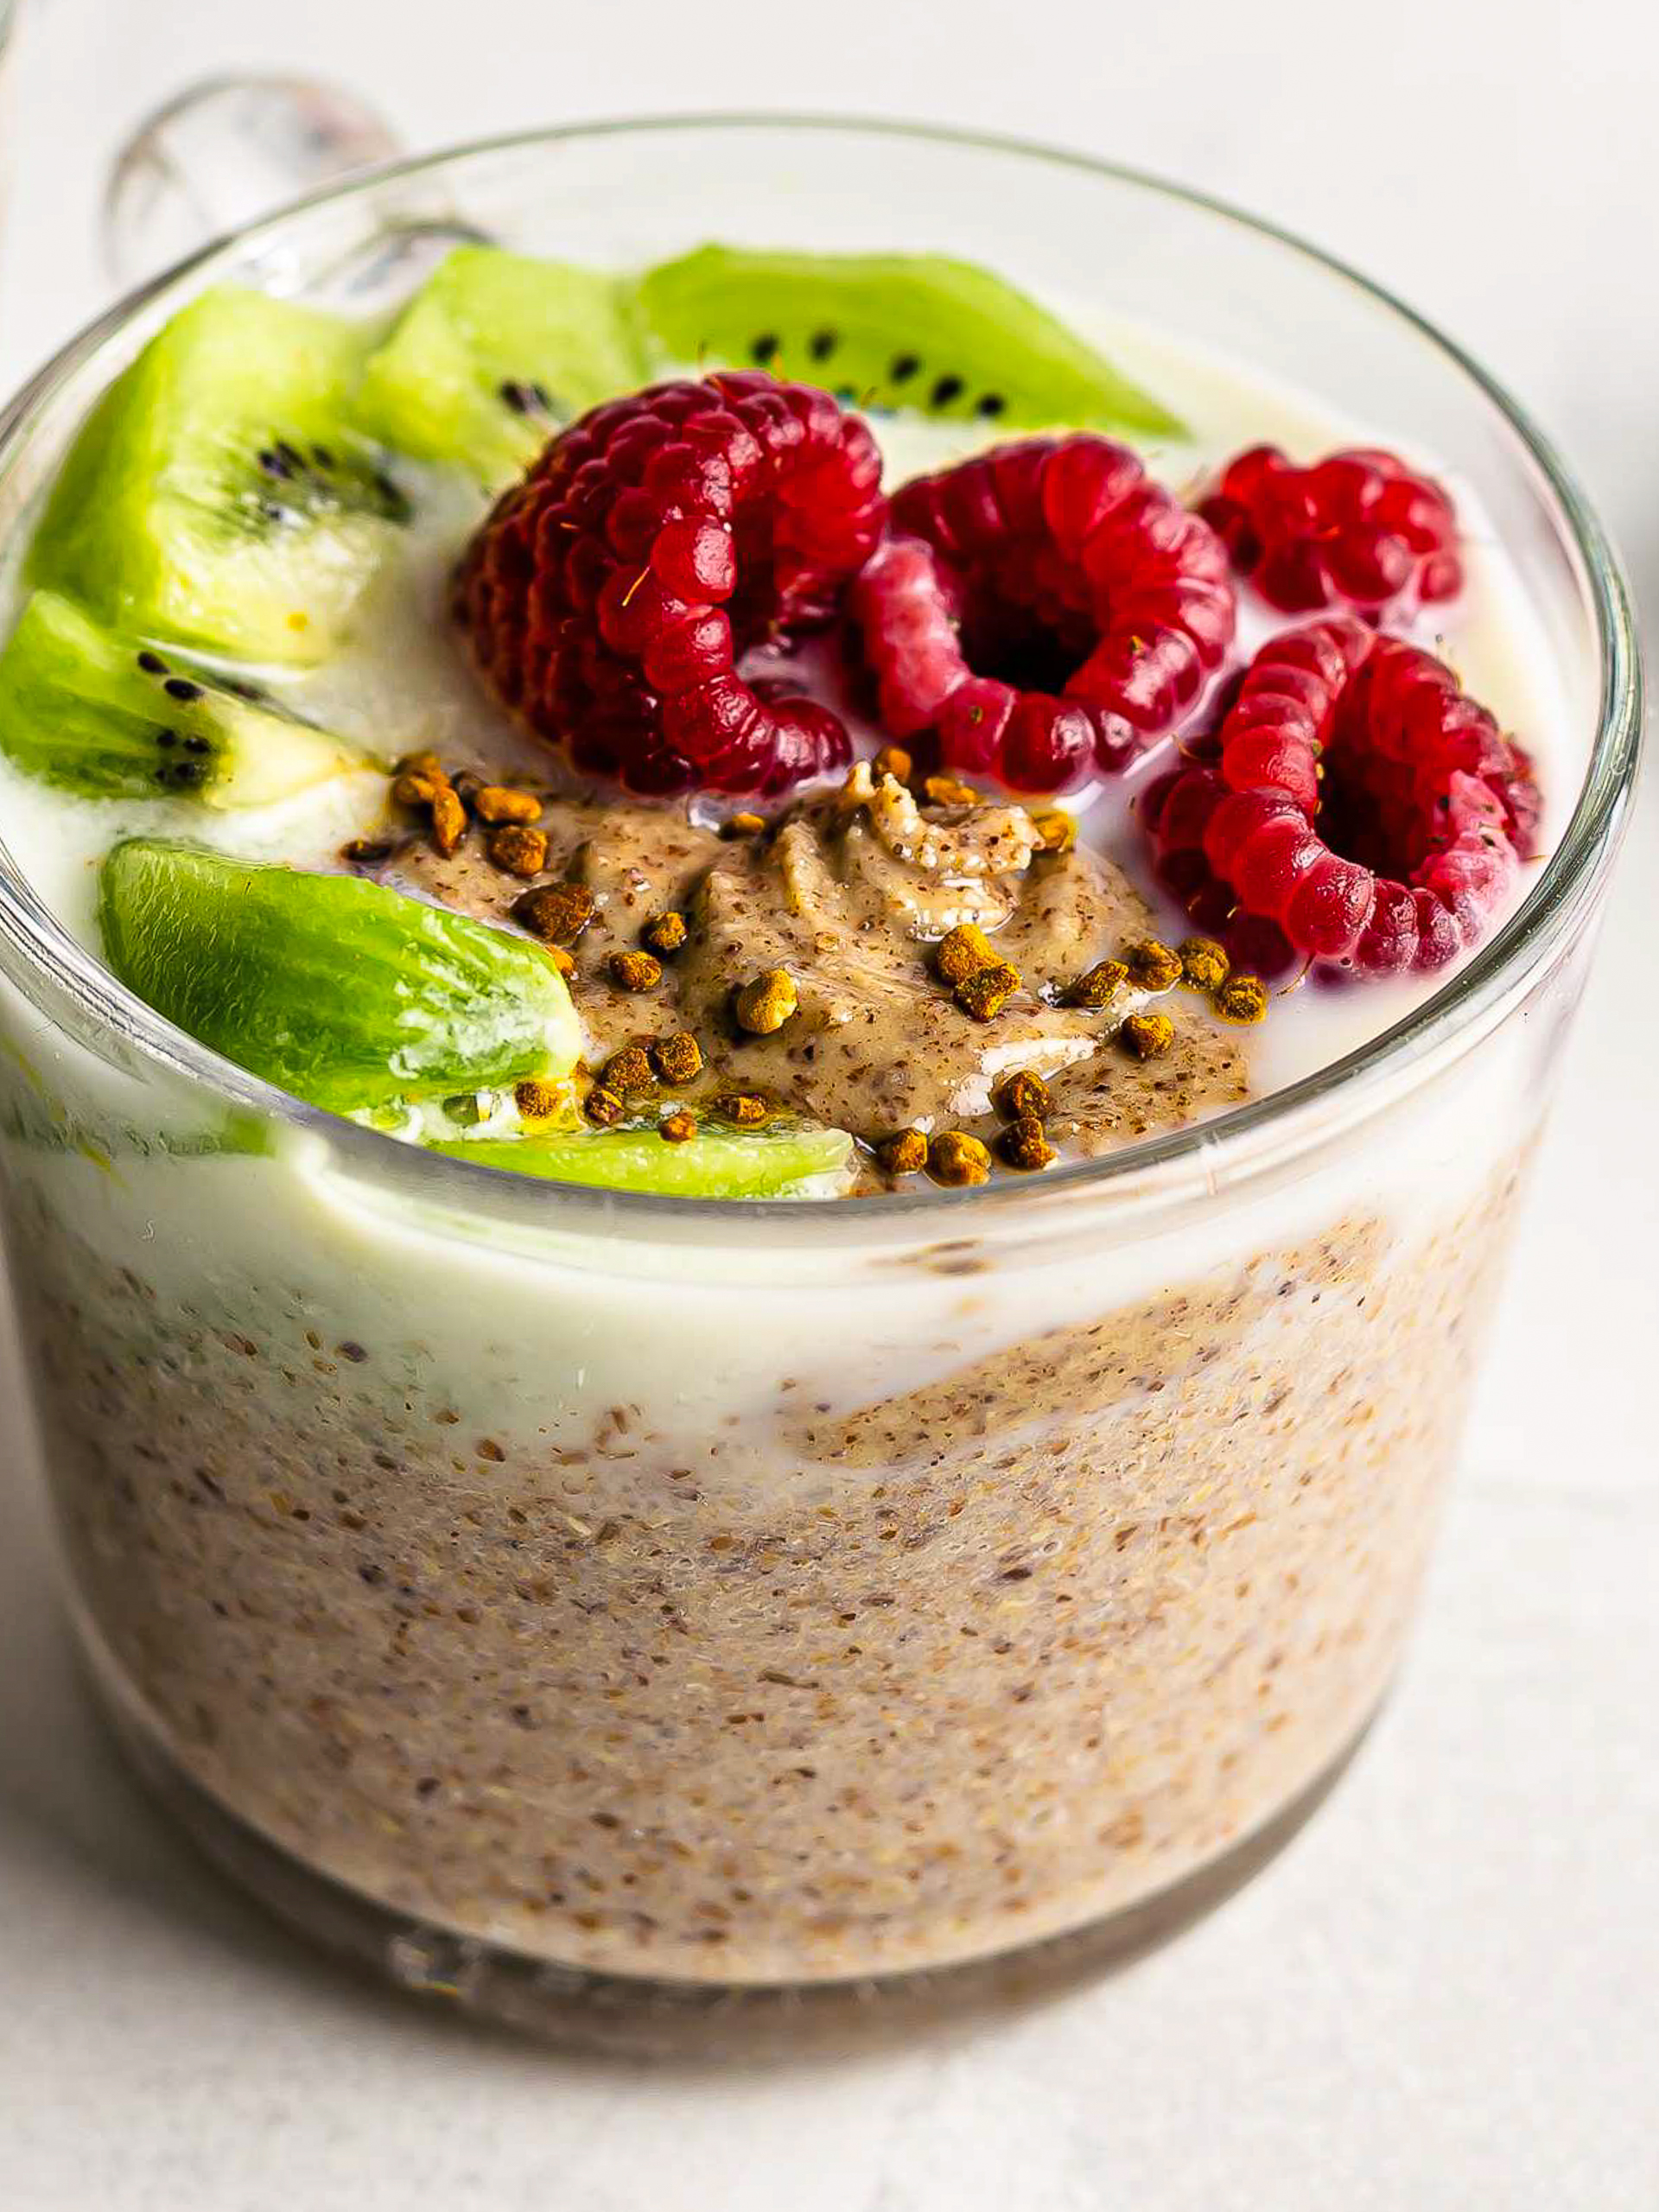 7 Mood-Boosting Breakfast Ideas to Start the Day Happy